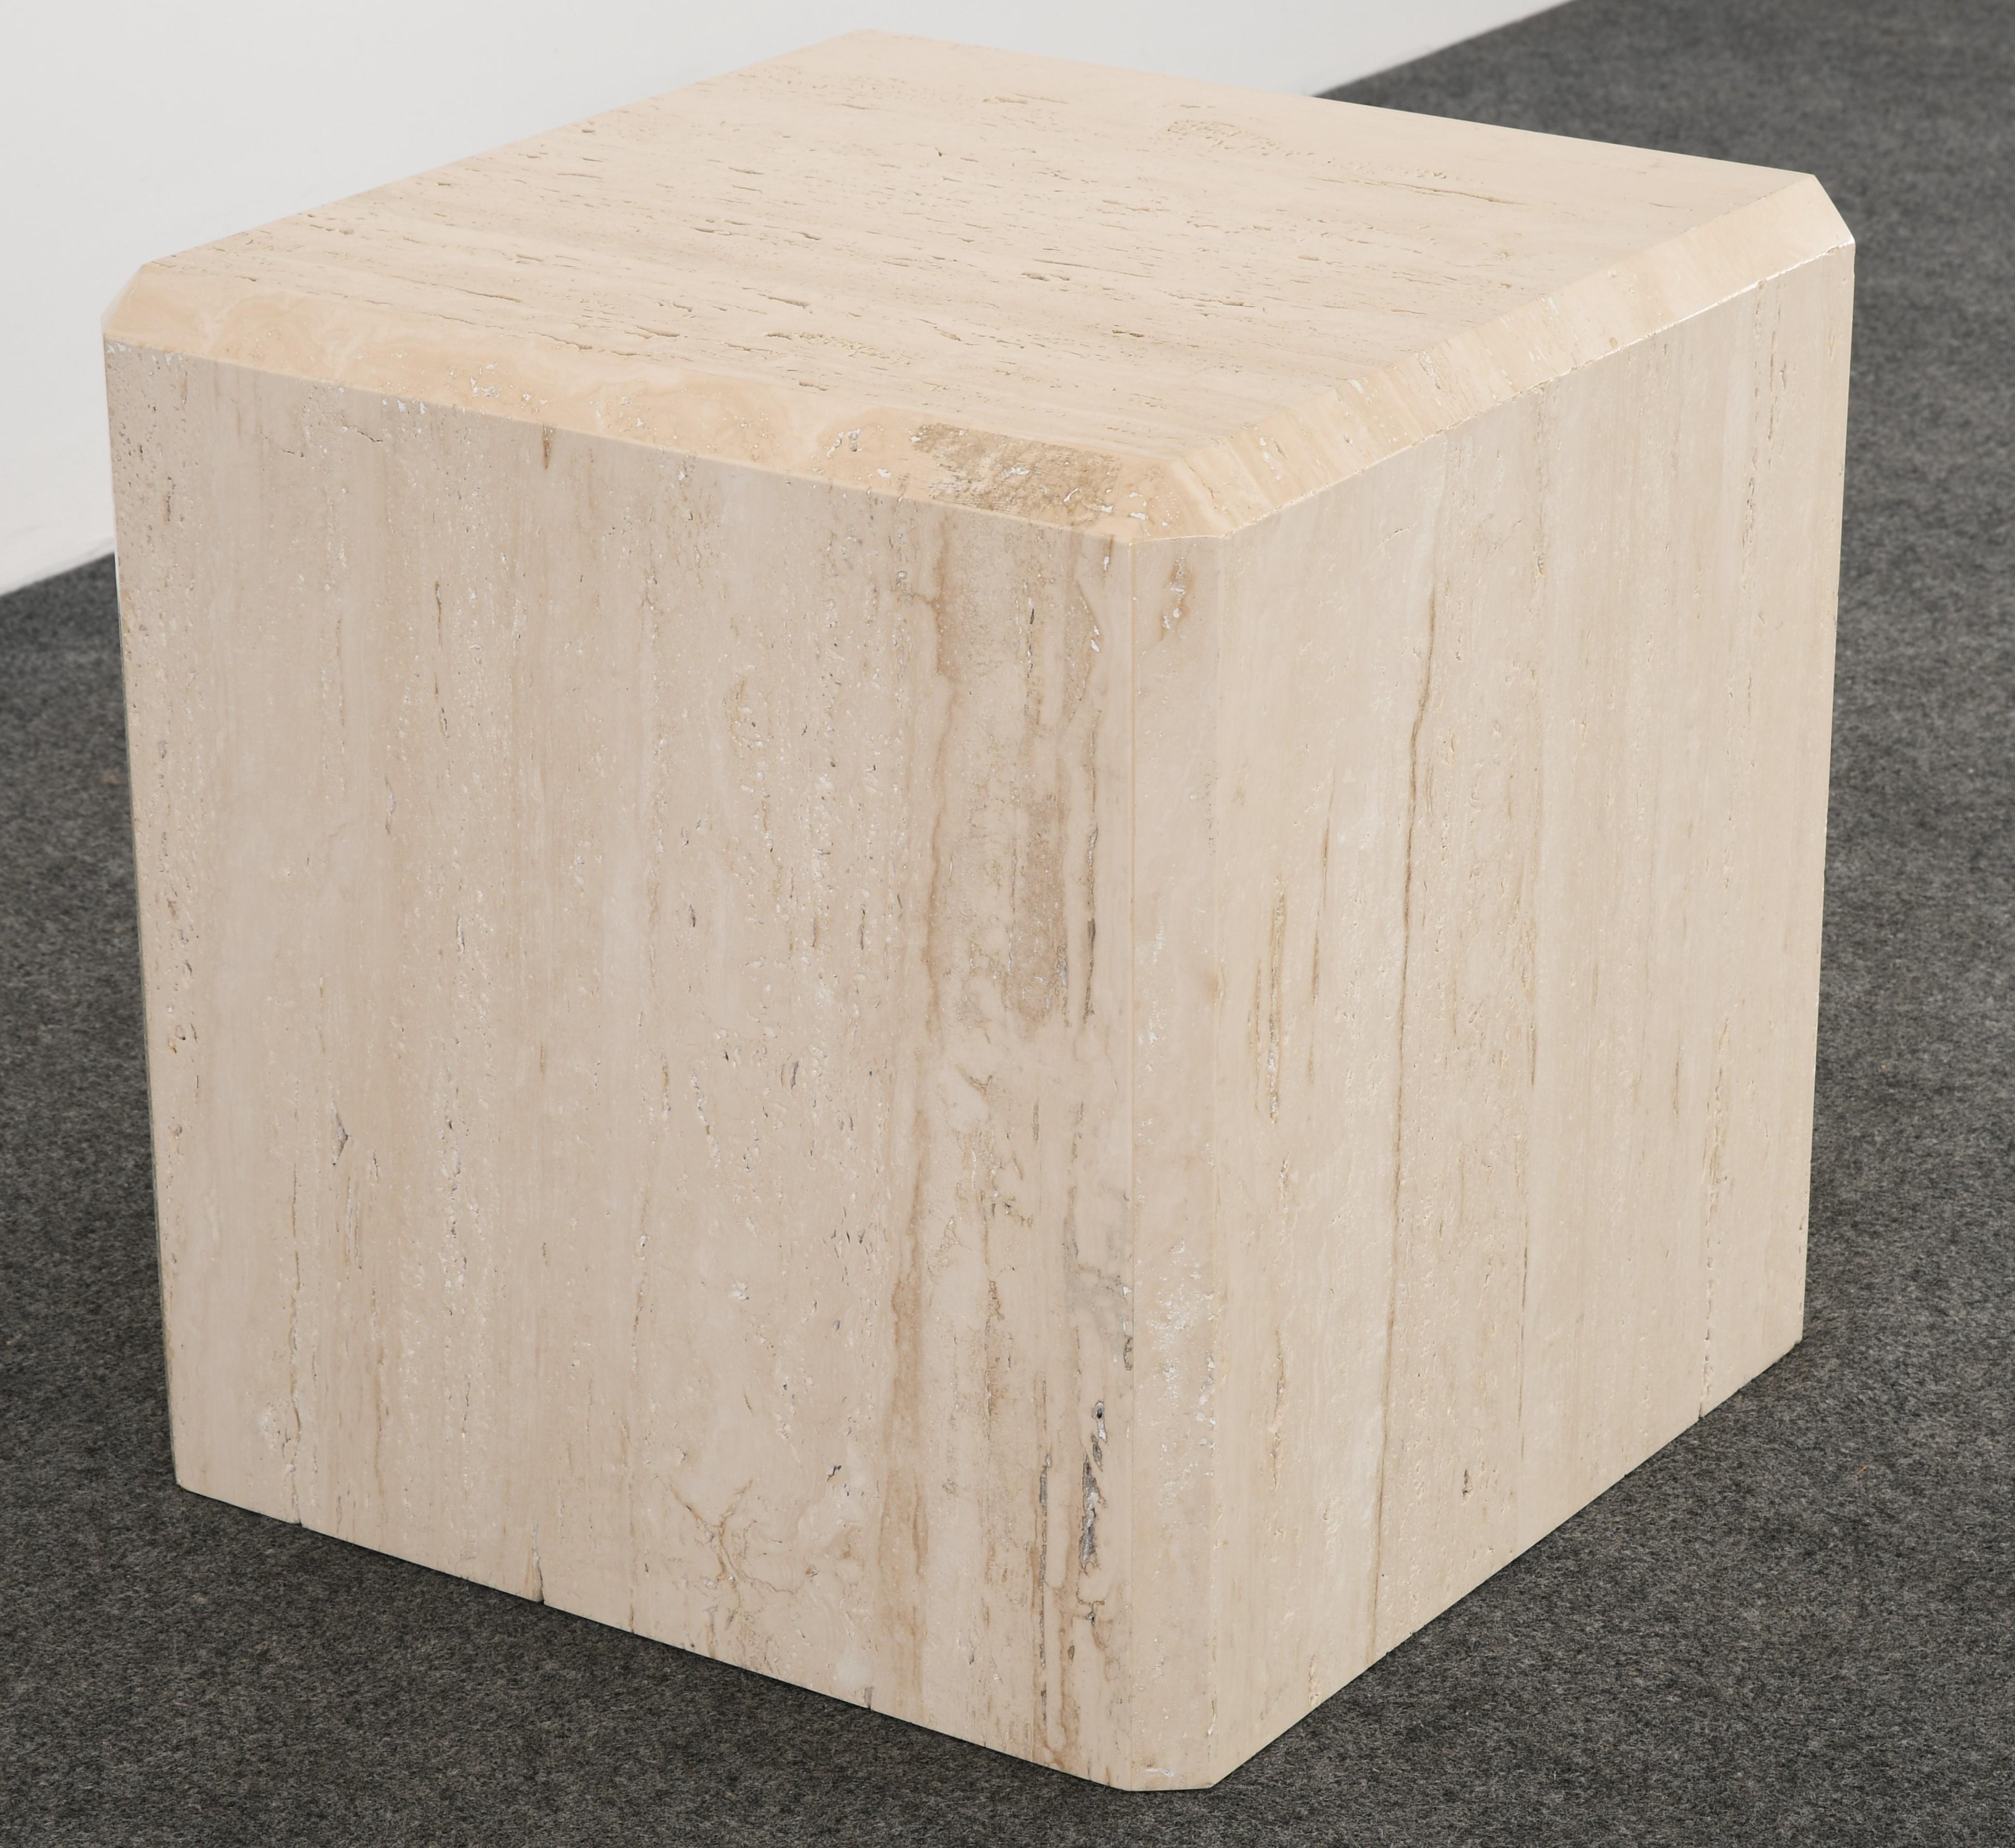 A minimalist travertine cube table in the manner of Kreiss with beveled edge top. This beautiful travertine table would look great in a modern or contemporary setting. Very elegant and simple design. Structurally sound with age-appropriate wear.